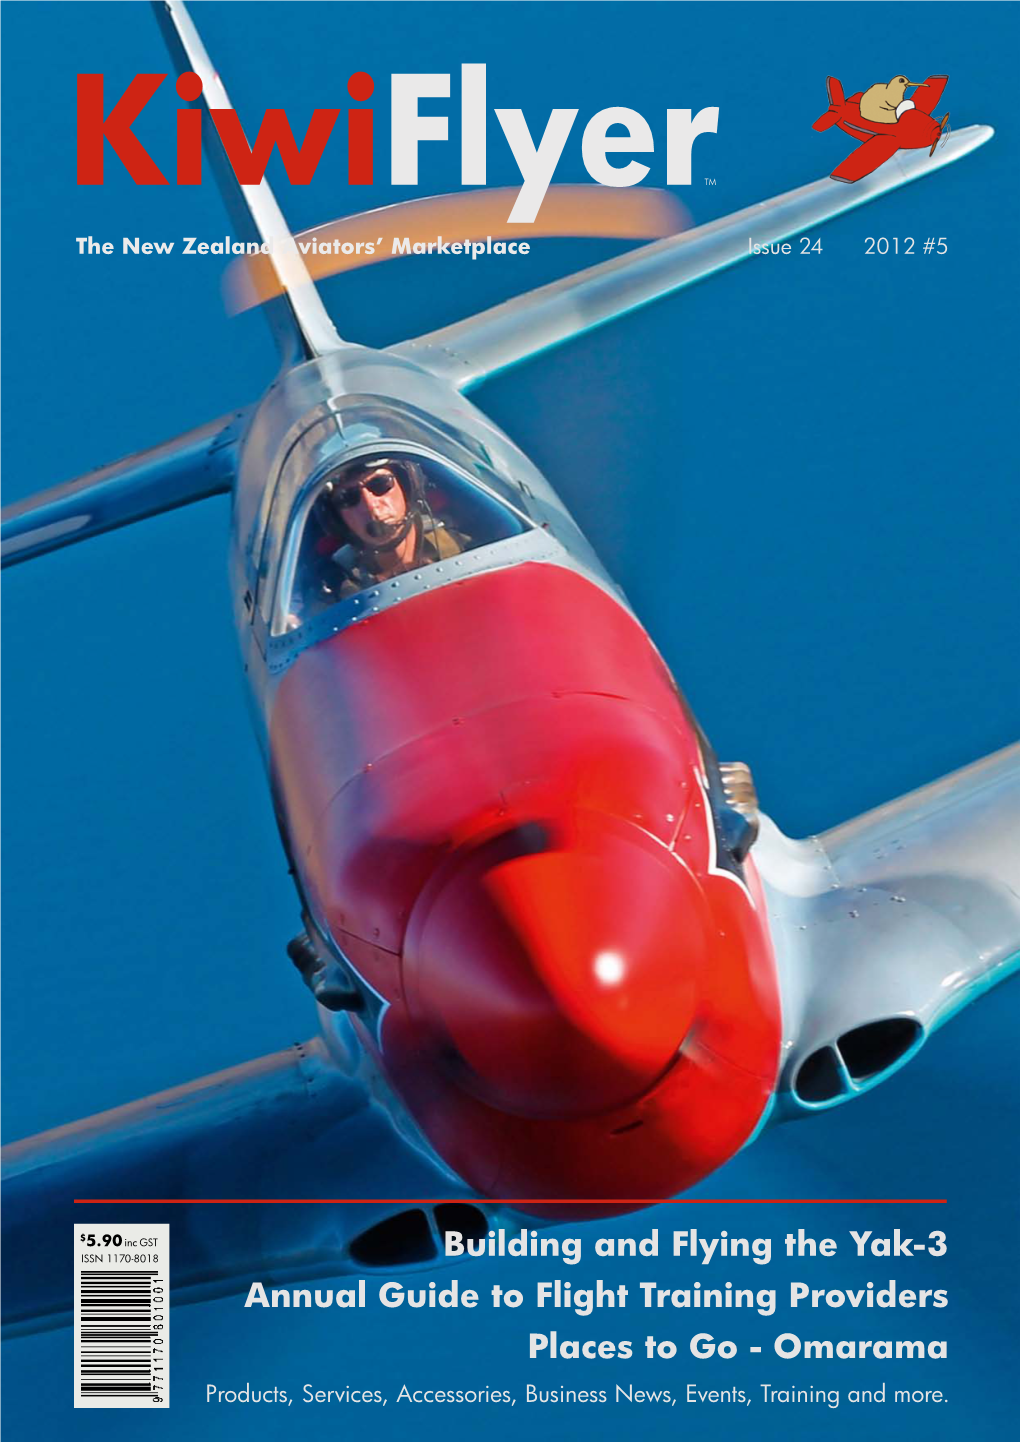 Building and Flying the Yak-3 Annual Guide to Flight Training Providers